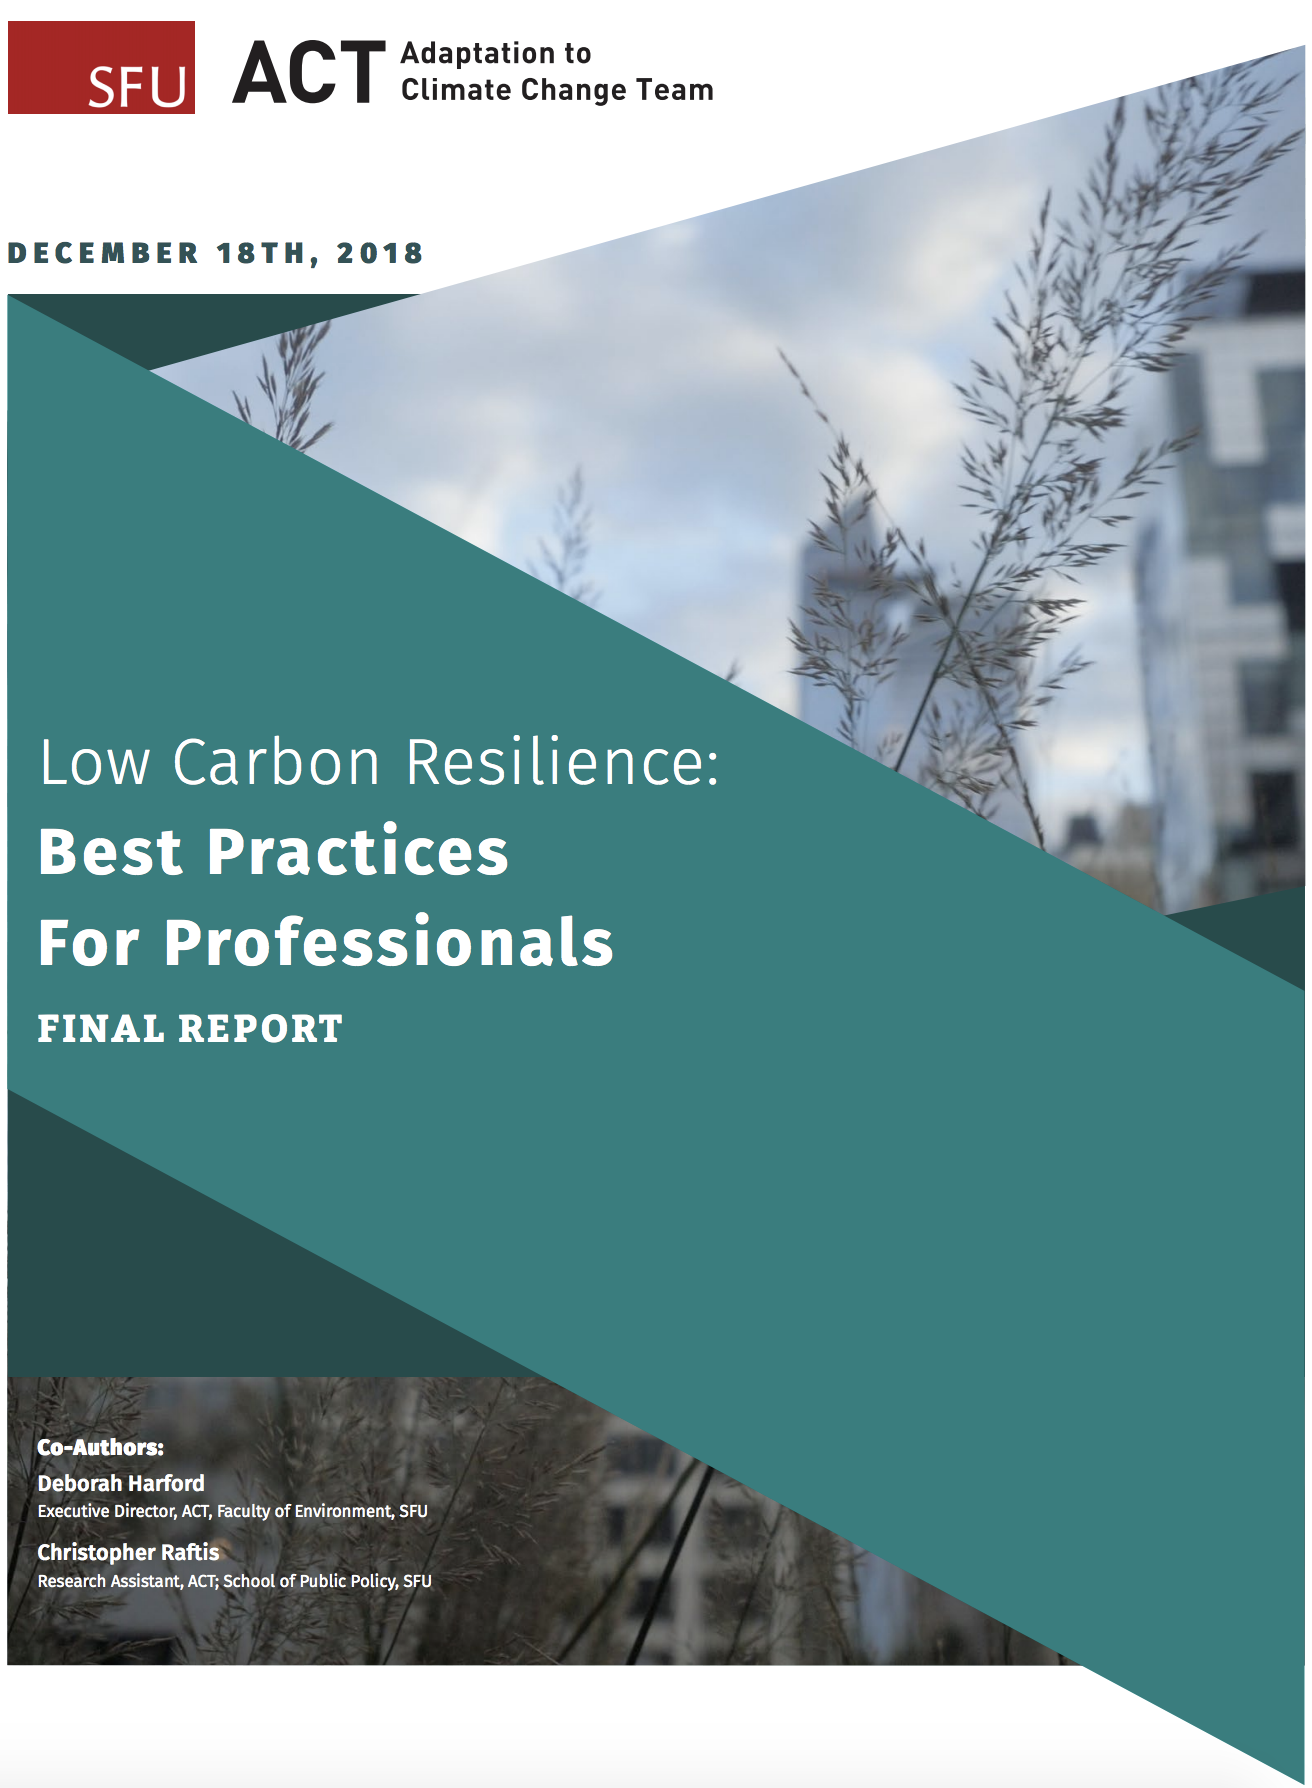 Low Carbon Resilience Best Practices for Professionals